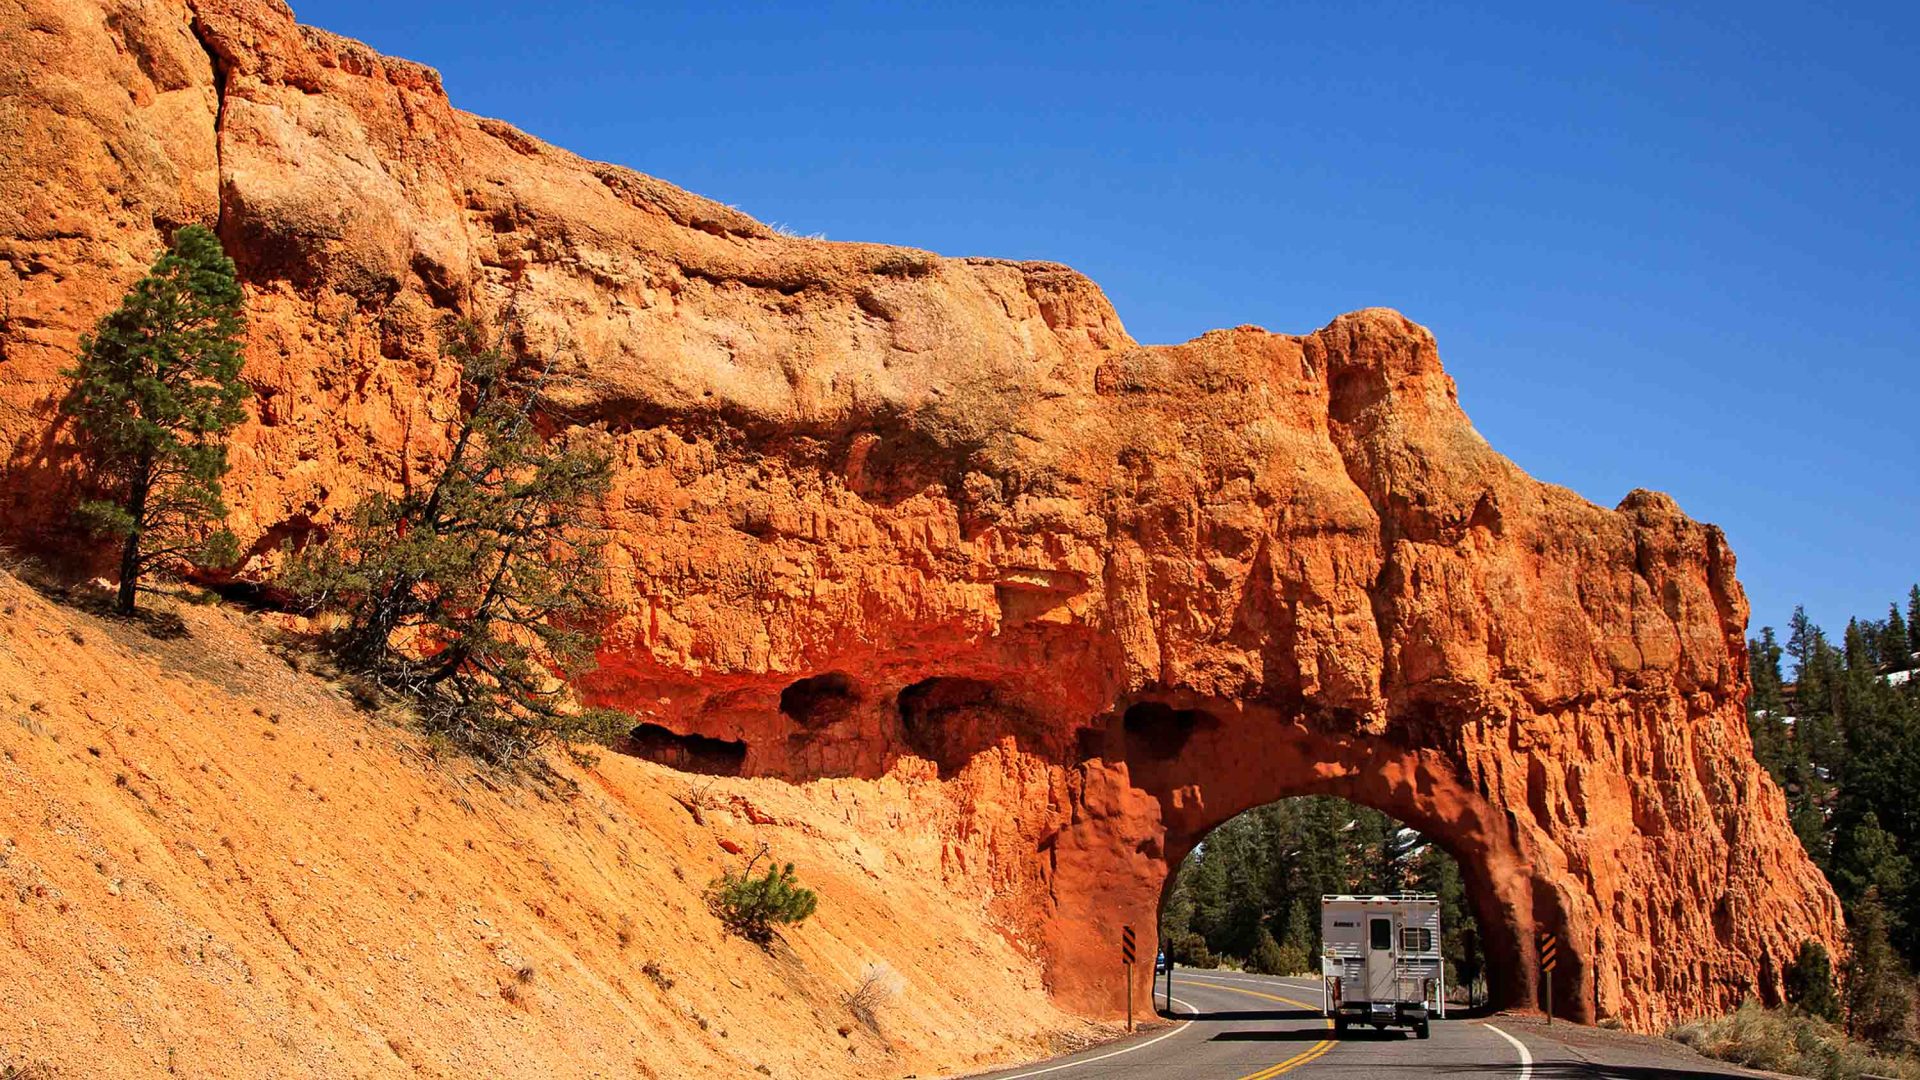 A car passes under a rock arch over the road.